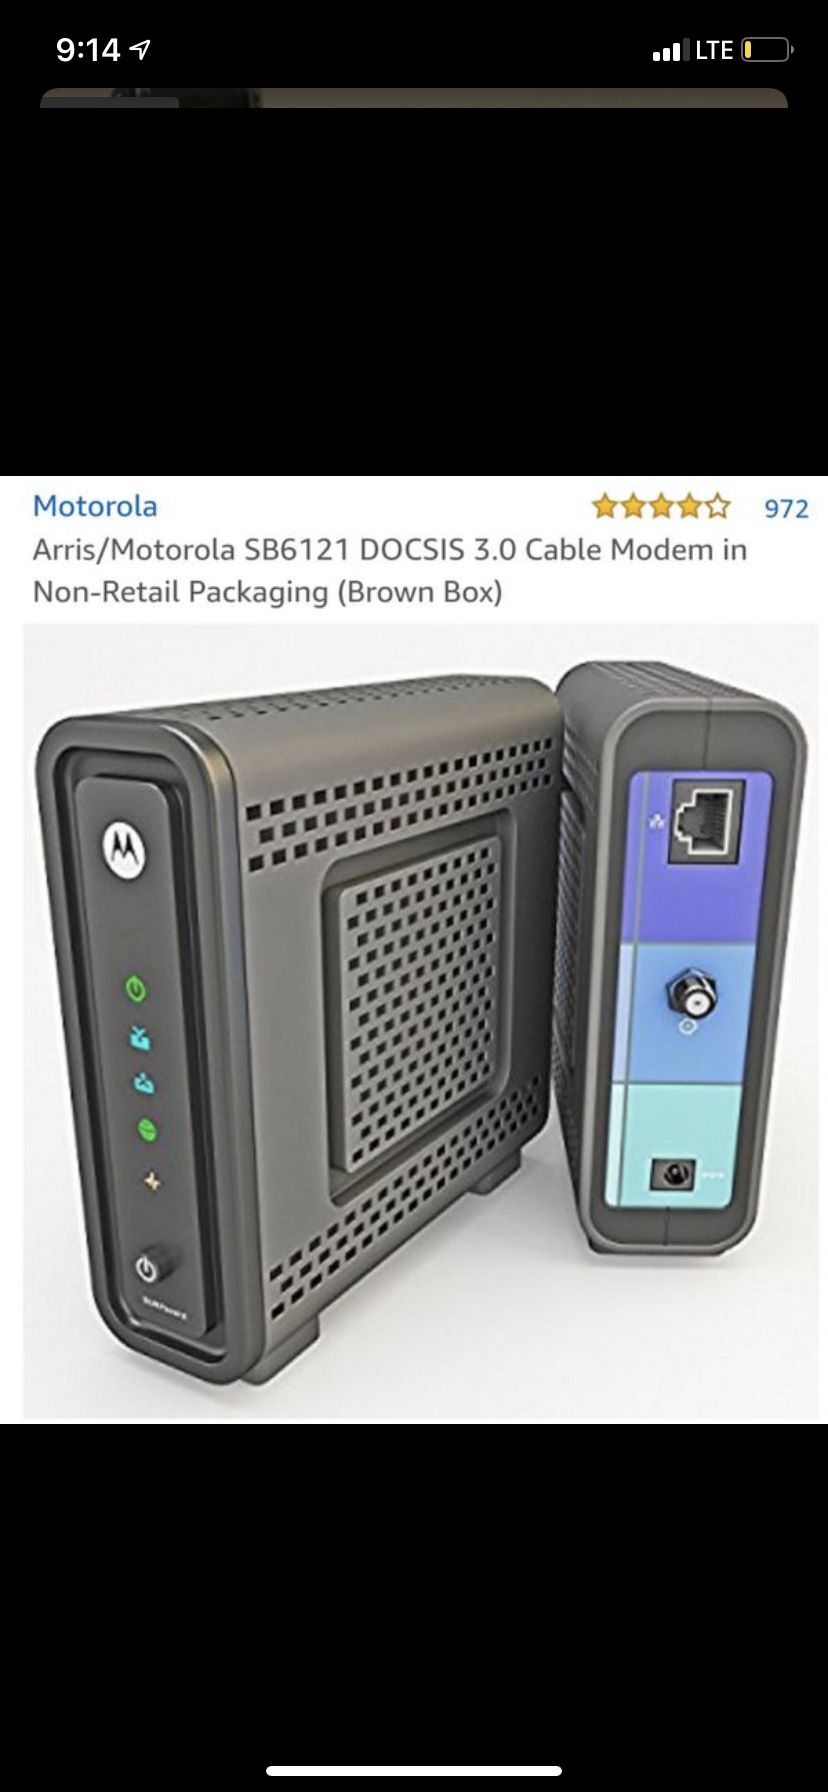 Motorola SB6121 cable modem and Netgear N600 WiFI Router